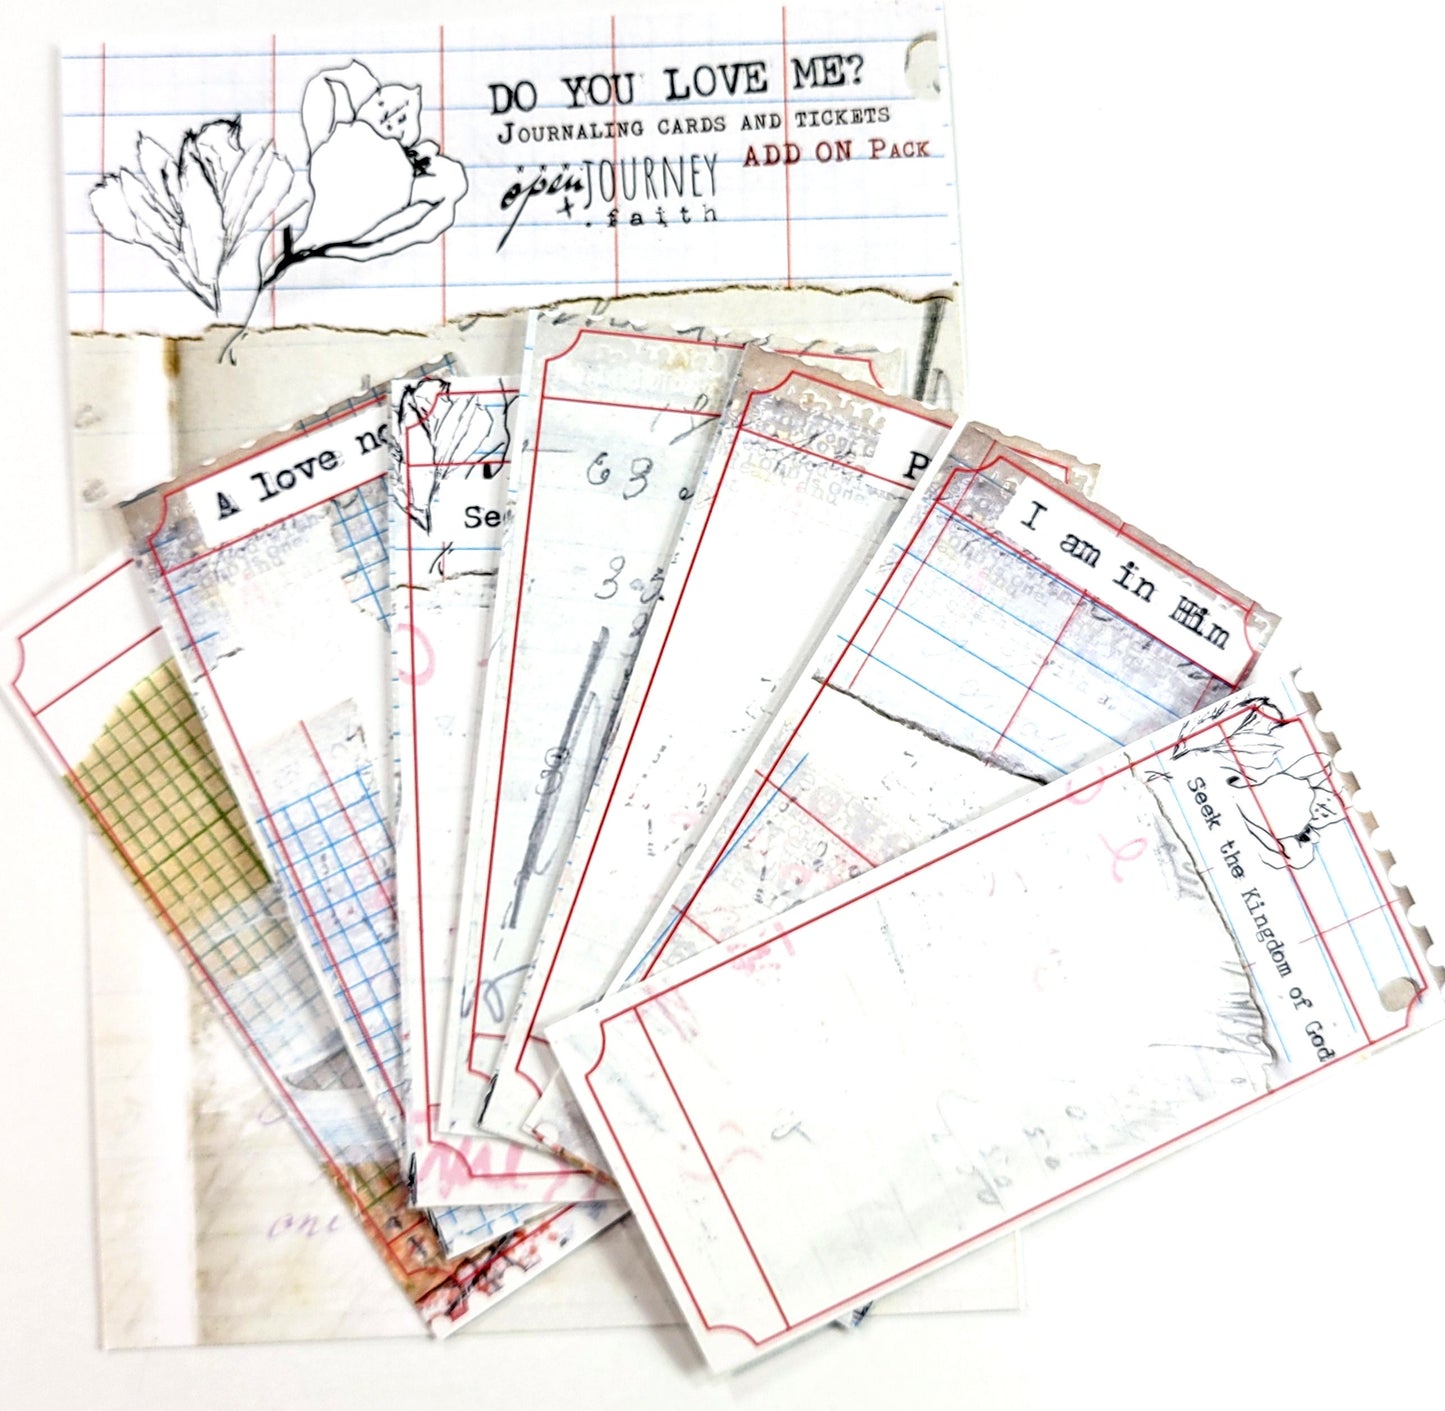 Do you love Me?- ADD ON journaling tickets